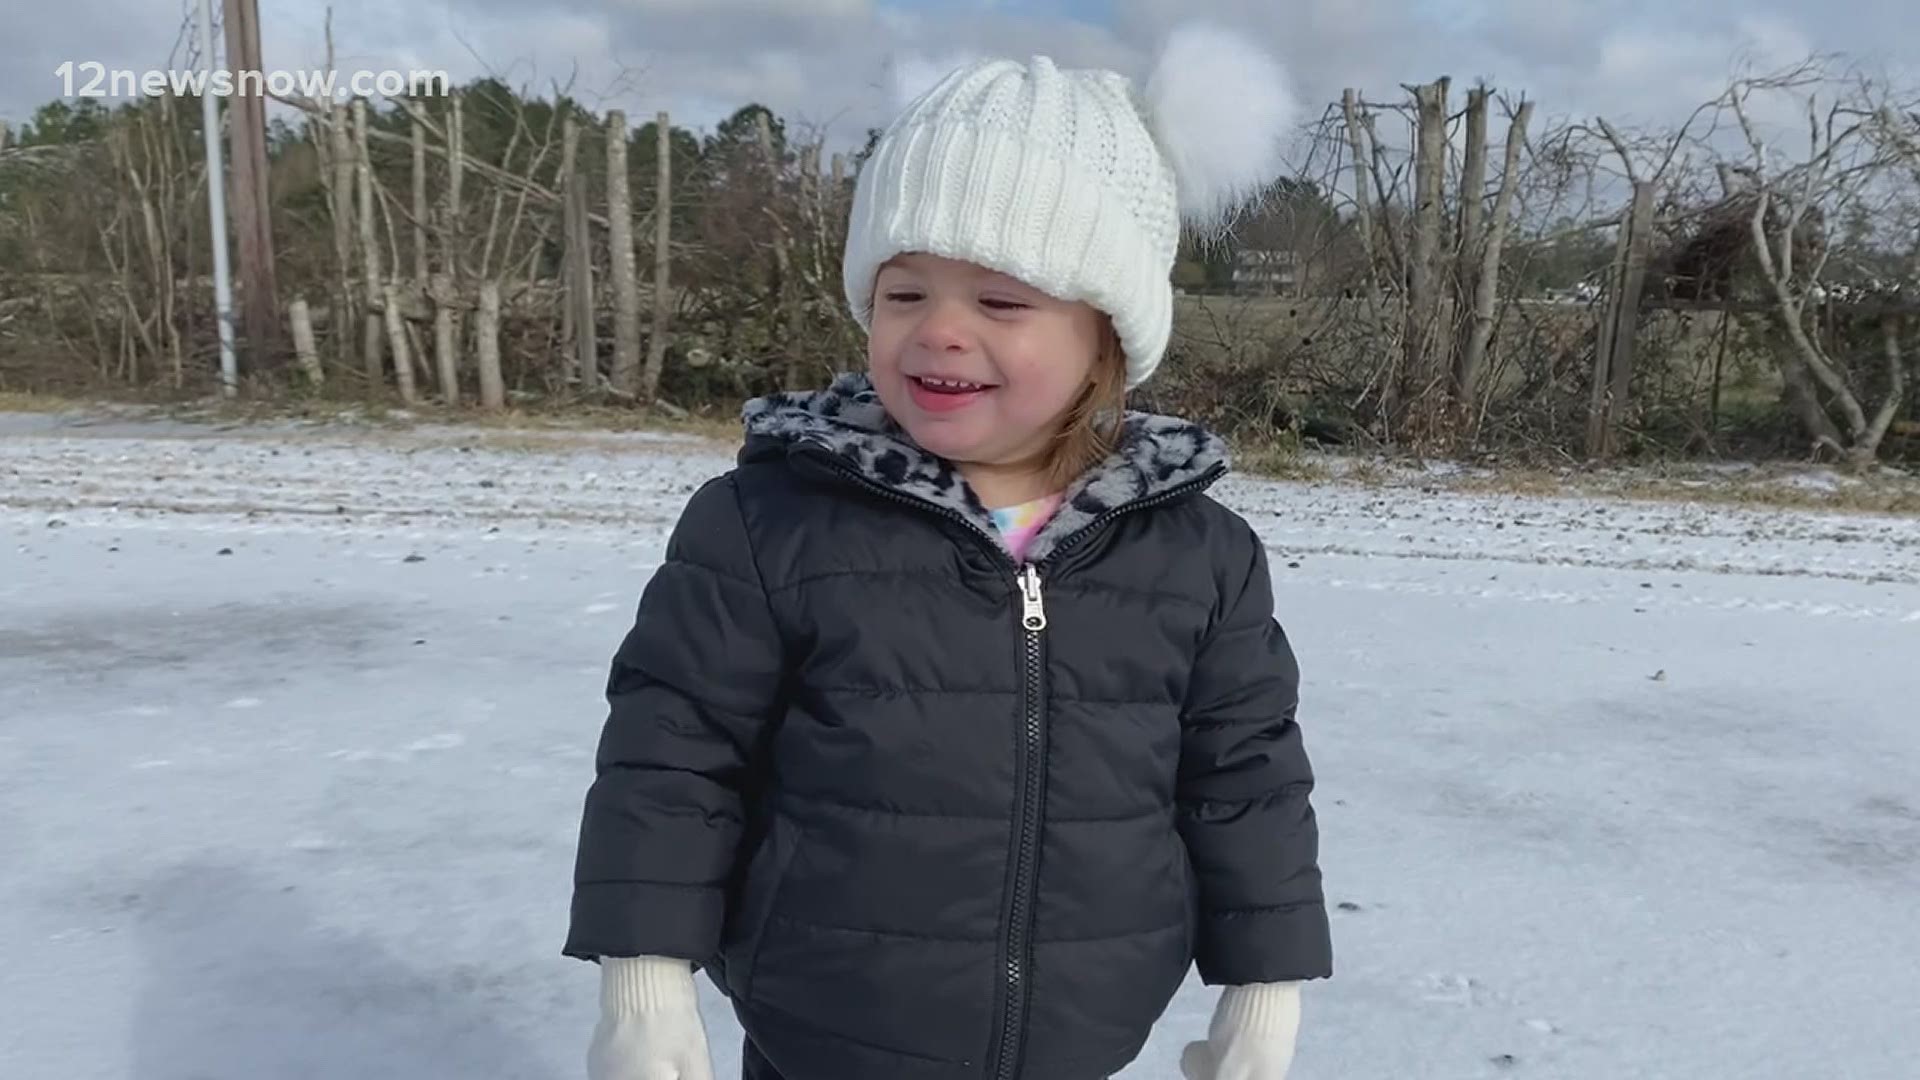 Fun photos and videos of kids, pups and even a few adults enjoying the snow during the winter storm